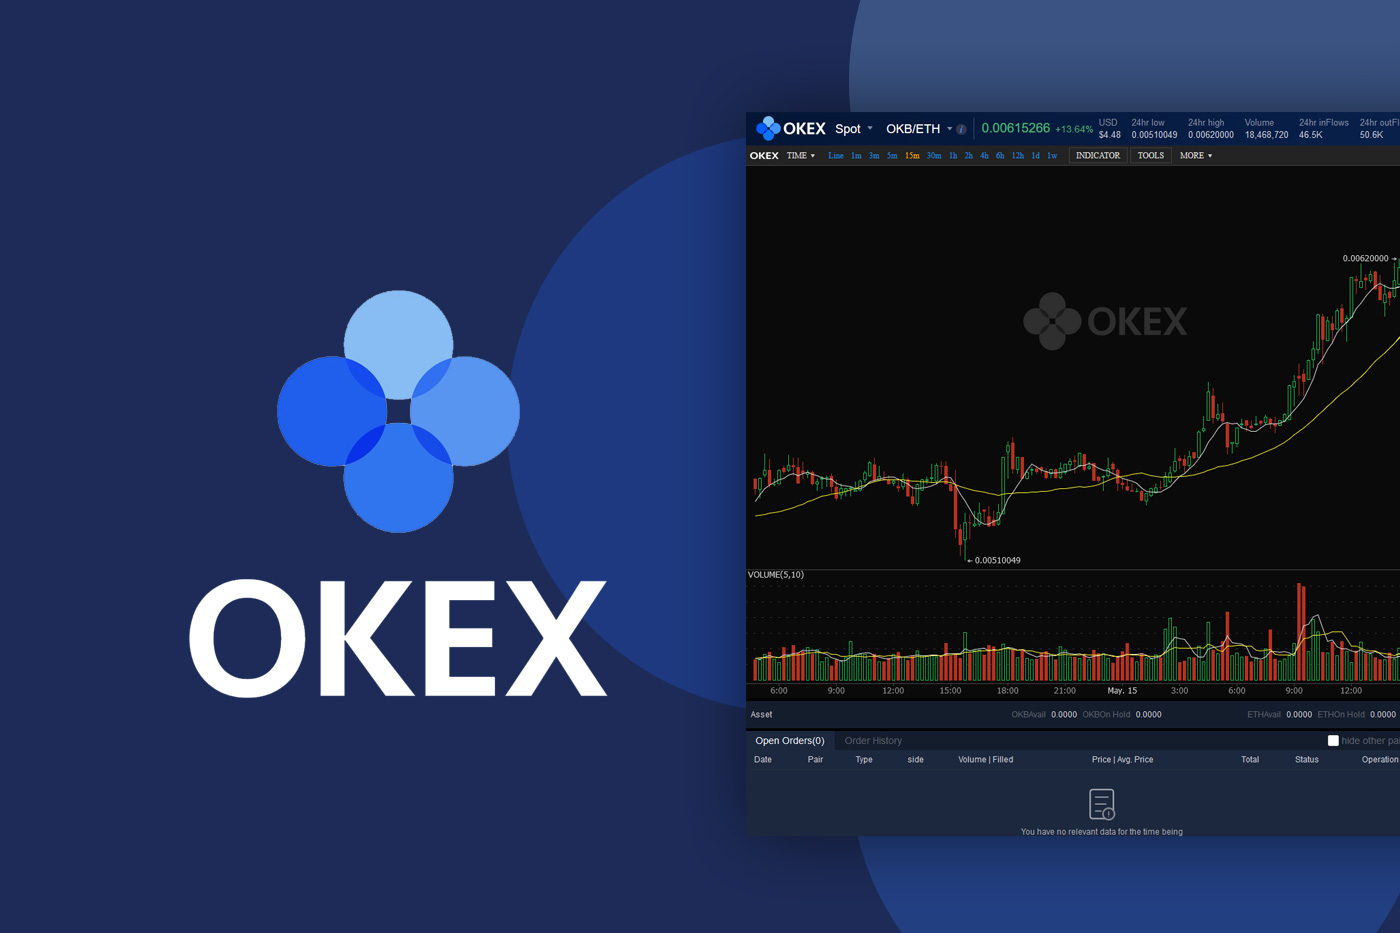 OKEX EXCHANGE ANNOUNCED THE DE-LISTING OF 49 TRADING PAIRS